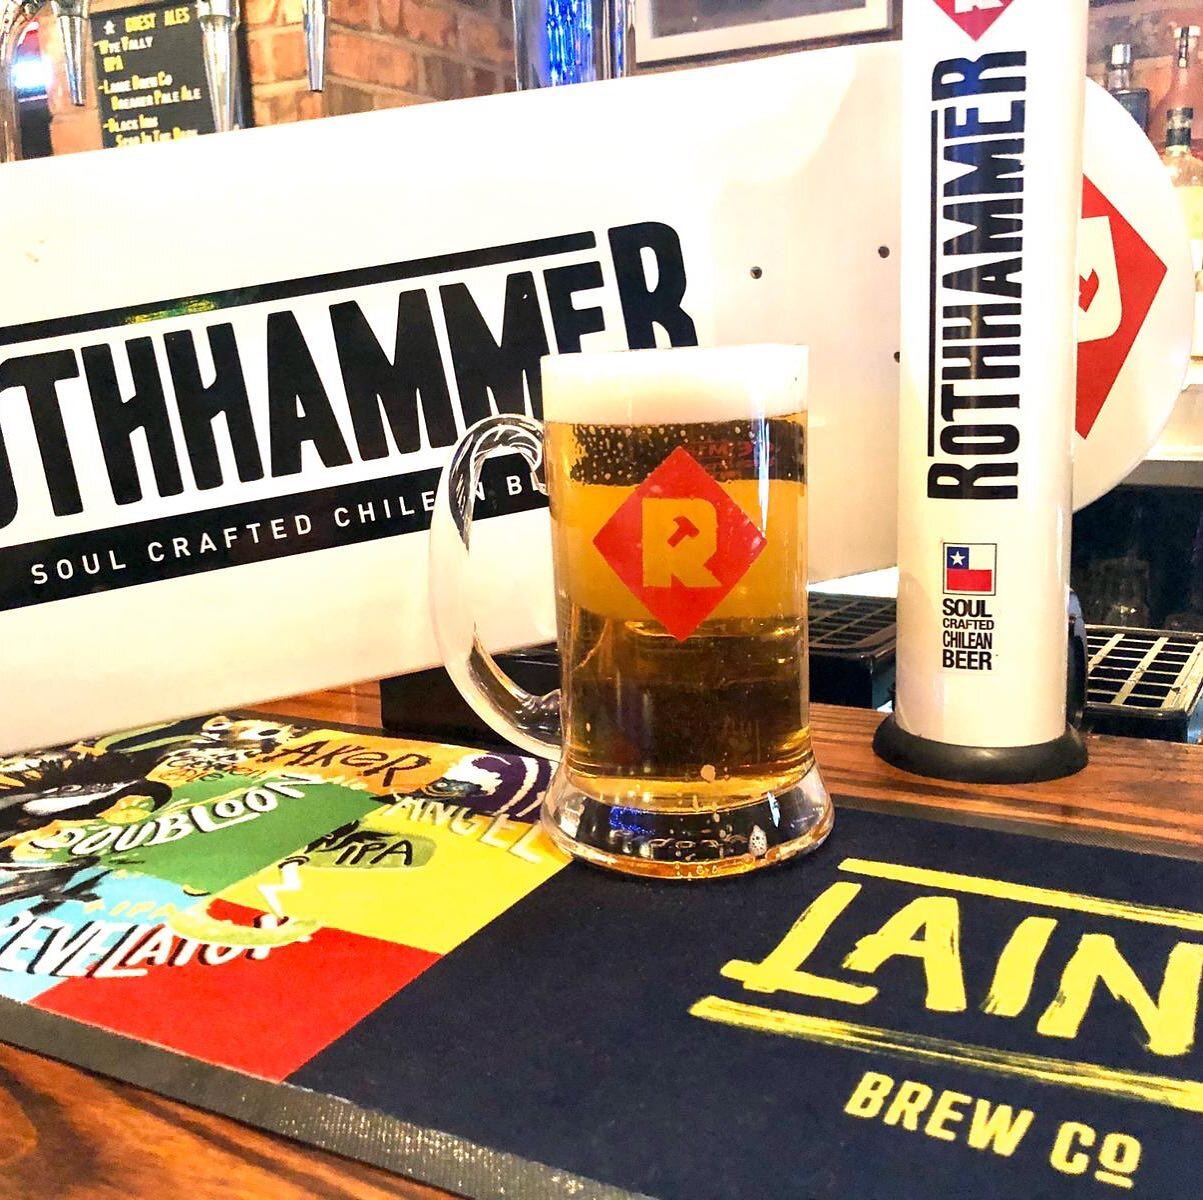 1 week to go to the pubs reopening ✊🏻✊🏻✊🏻🙌🏻
#soulcrafted #Chile #Rothhammer #craftbeer #lager